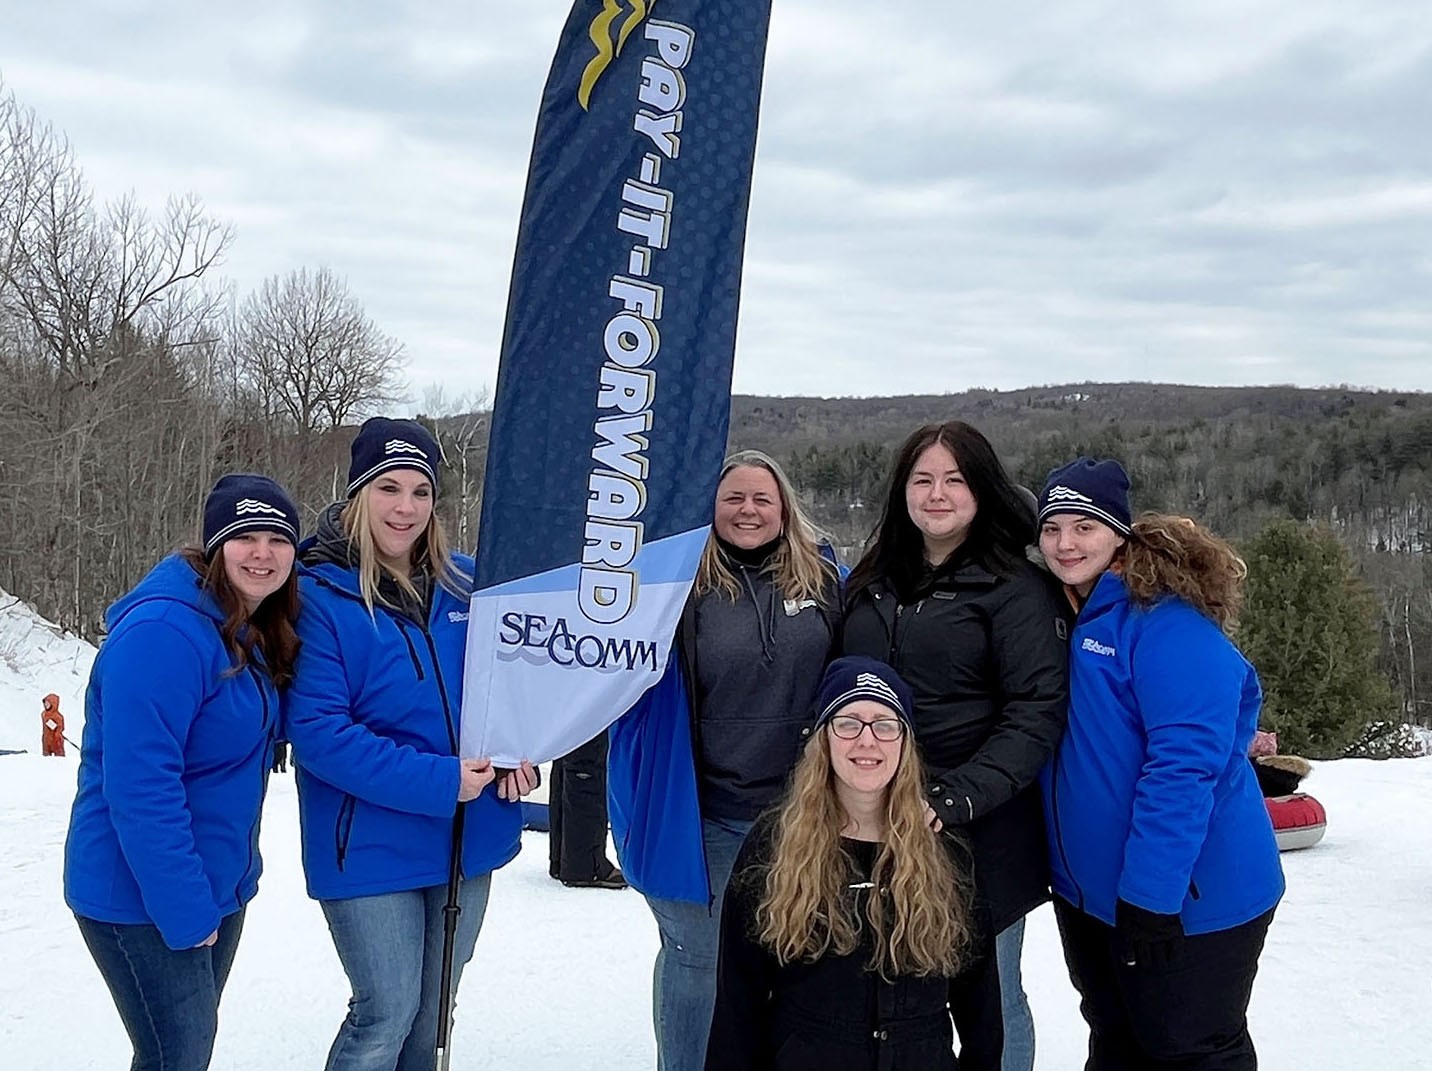 Staff out in the community with our Pay-It-Forward program shown at Titus Mountain providing free passes for tubing.